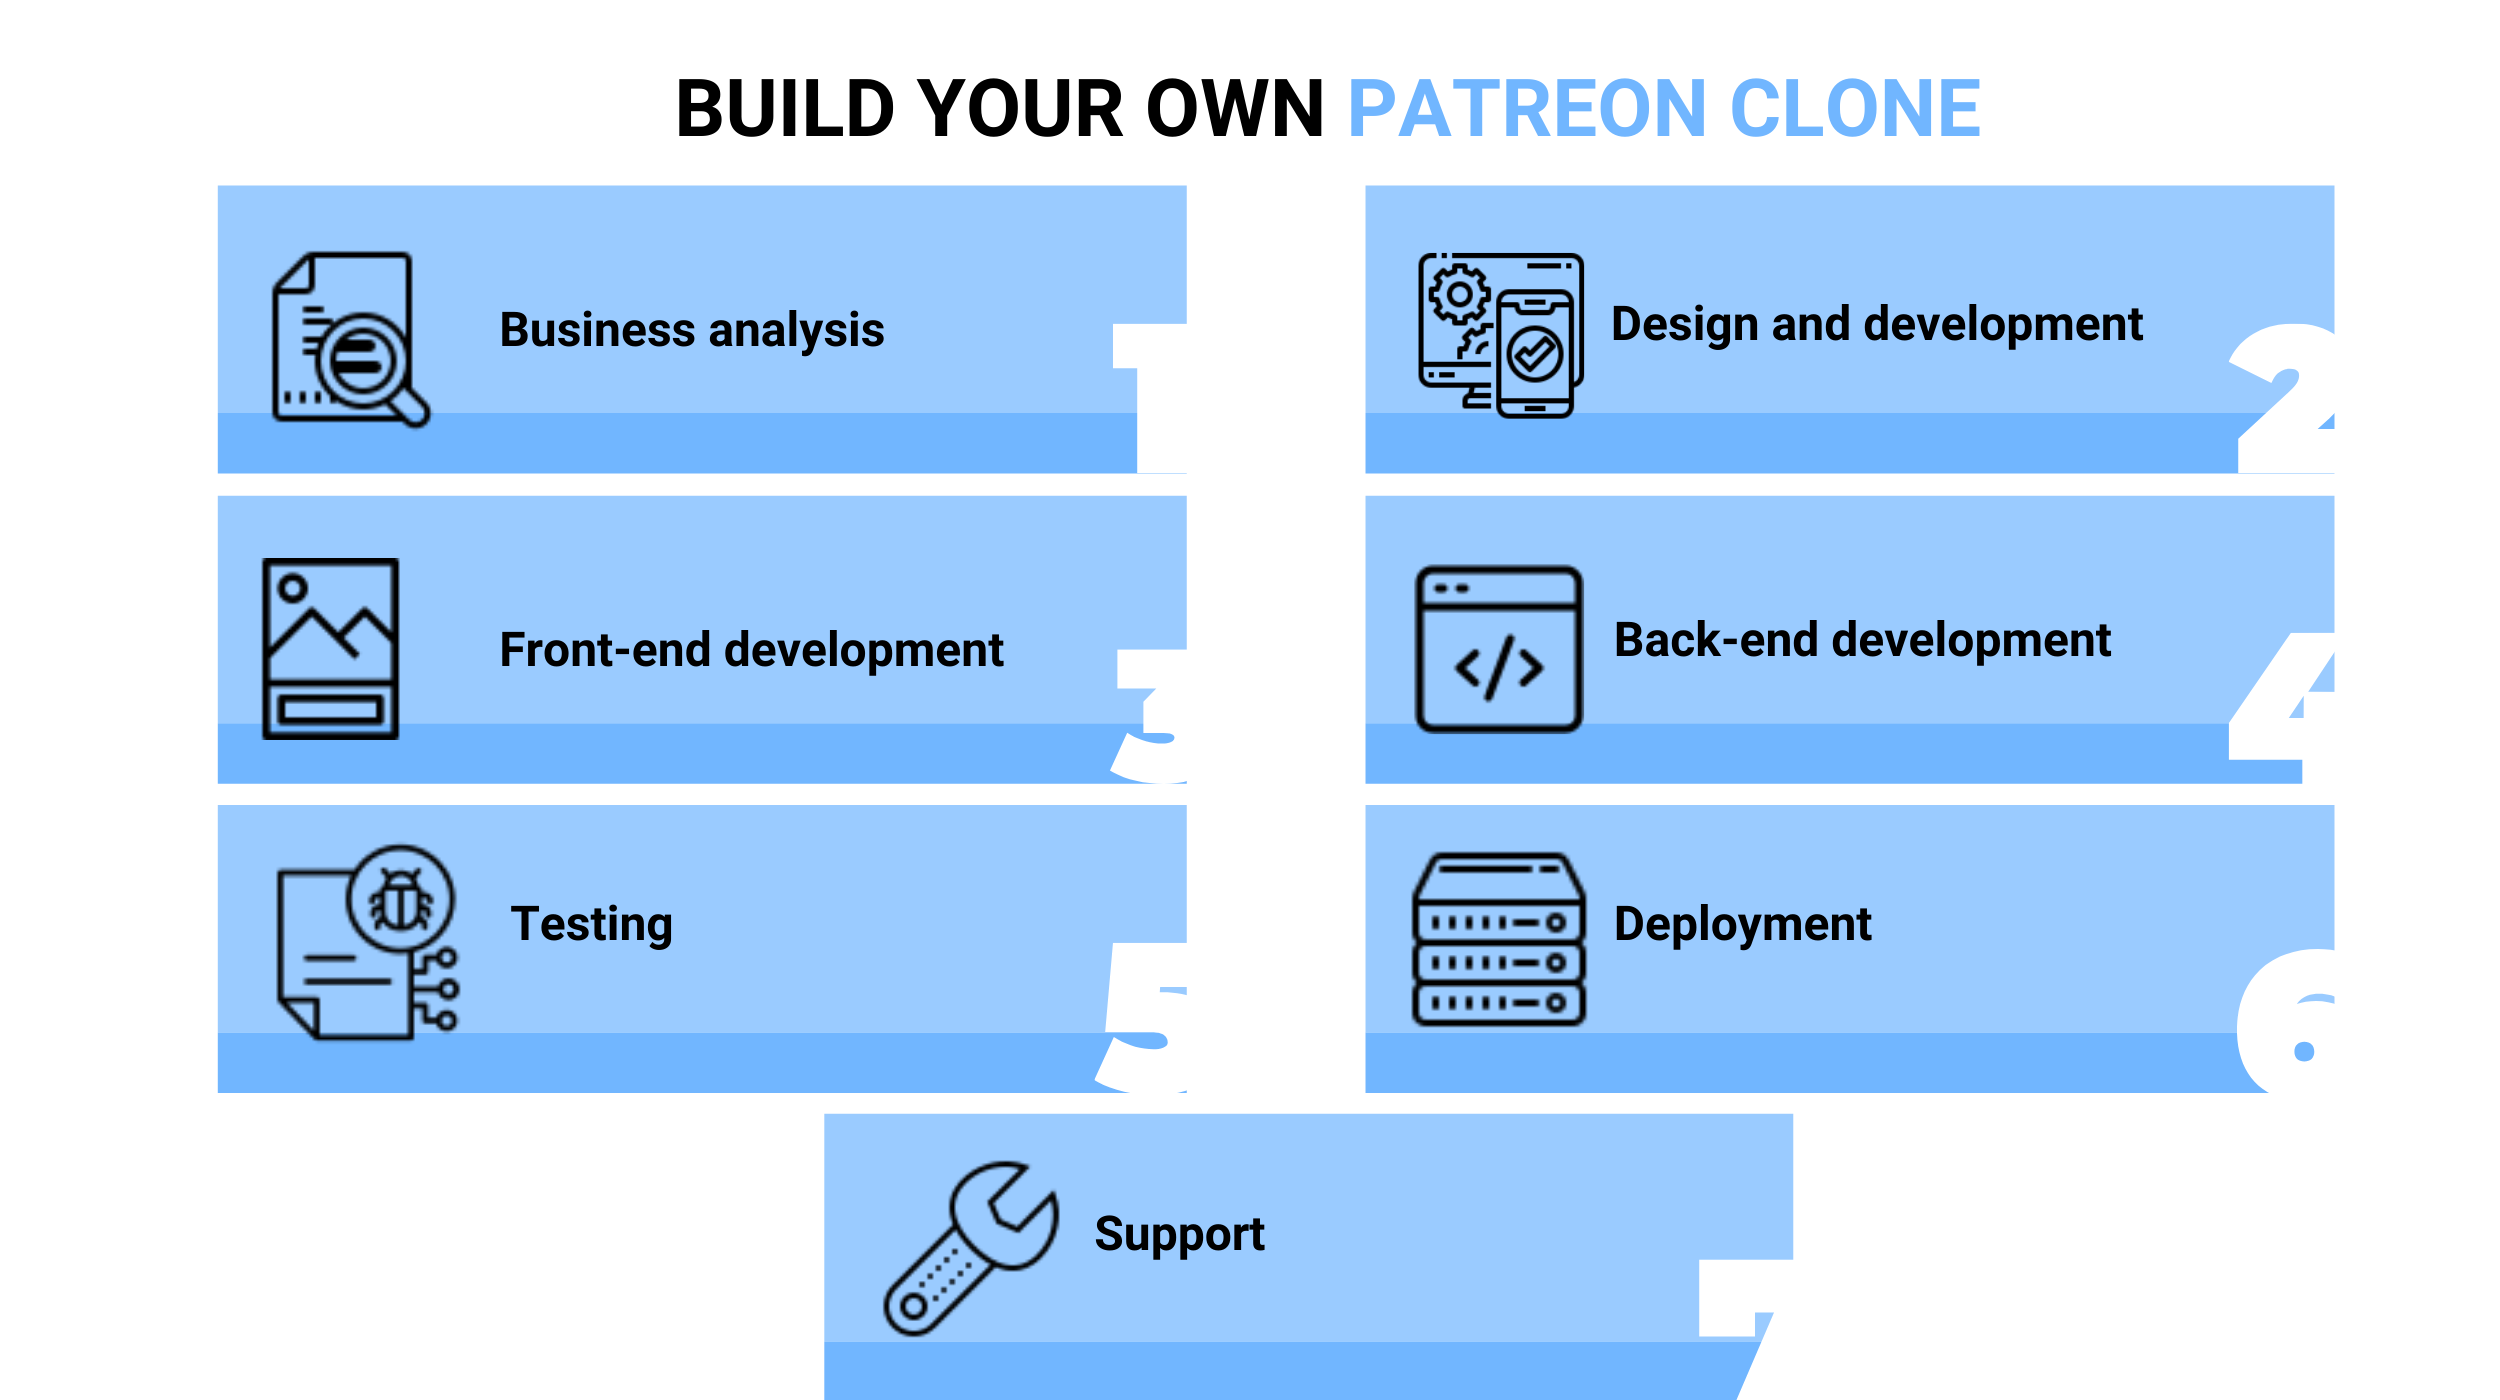 Build Your Own Patreon Clone